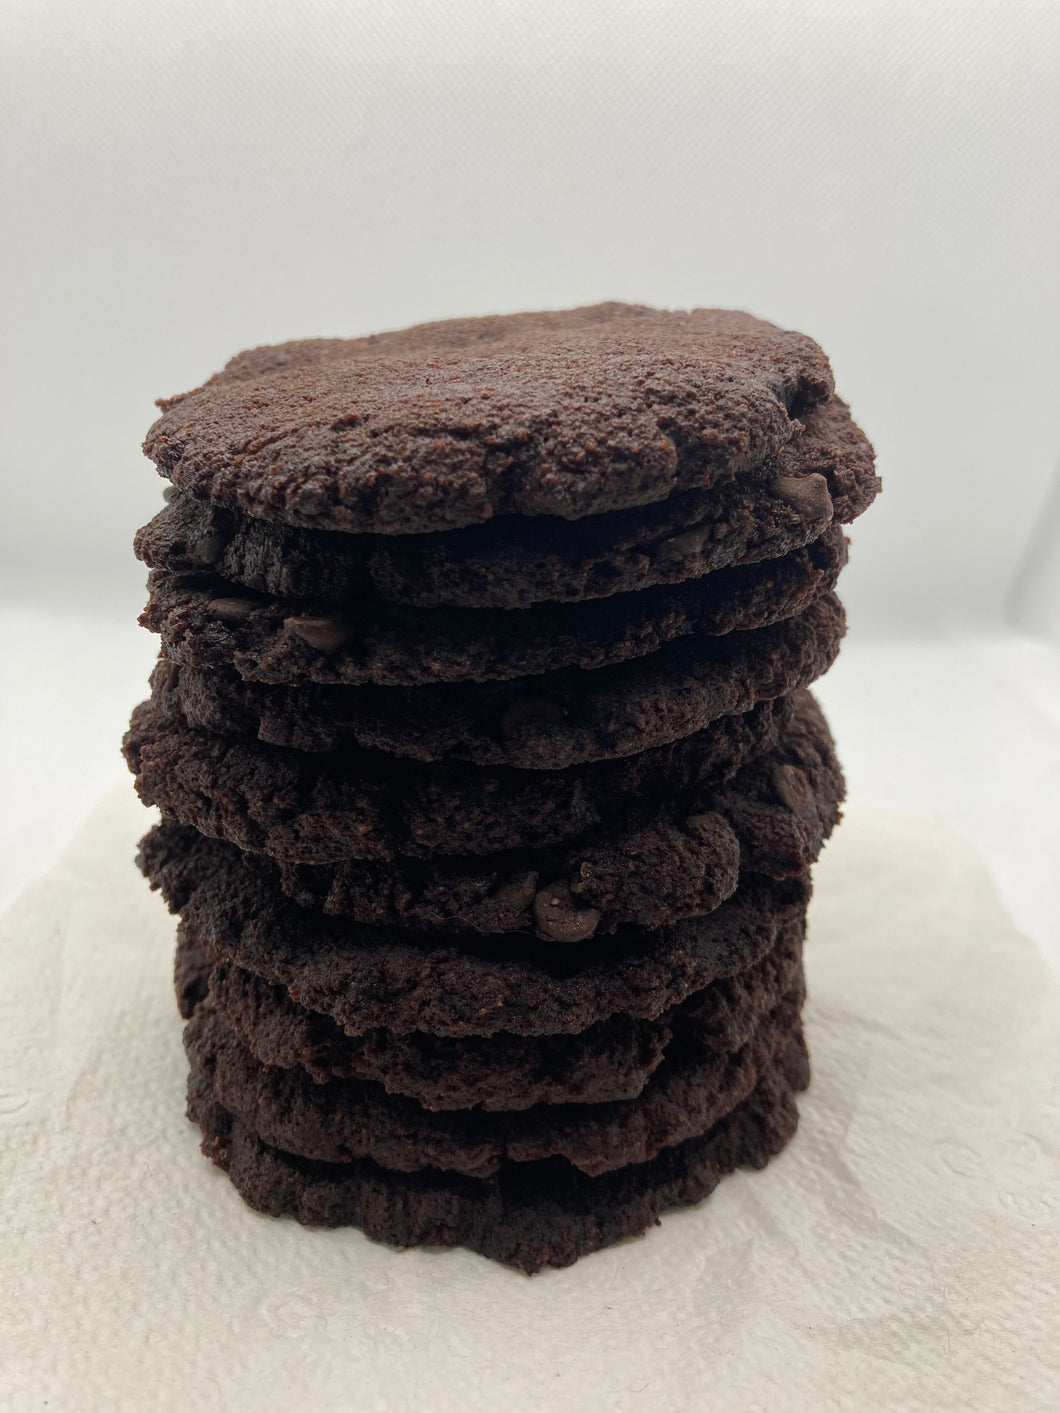 Double Dark Chocolate Chip Cookies (1 g Net Carbs per Cookie) (Box of 4 Pieces) Keto, Paleo and Diabetic Friendly and Gluten Free.